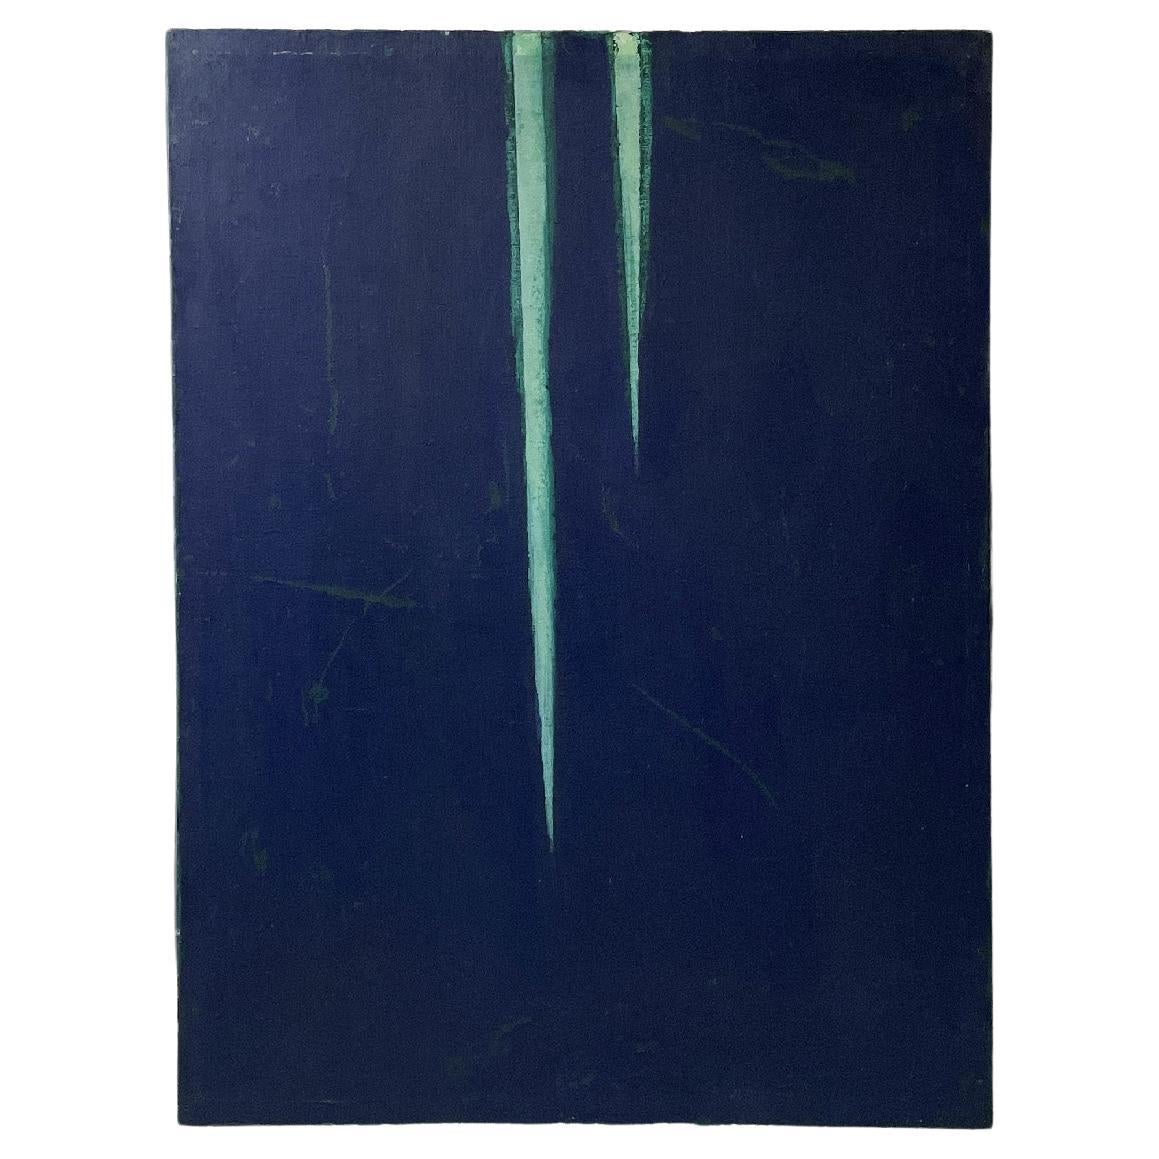 Italian modern blue and green acrylic painting by Domenico Messana, 1972 For Sale